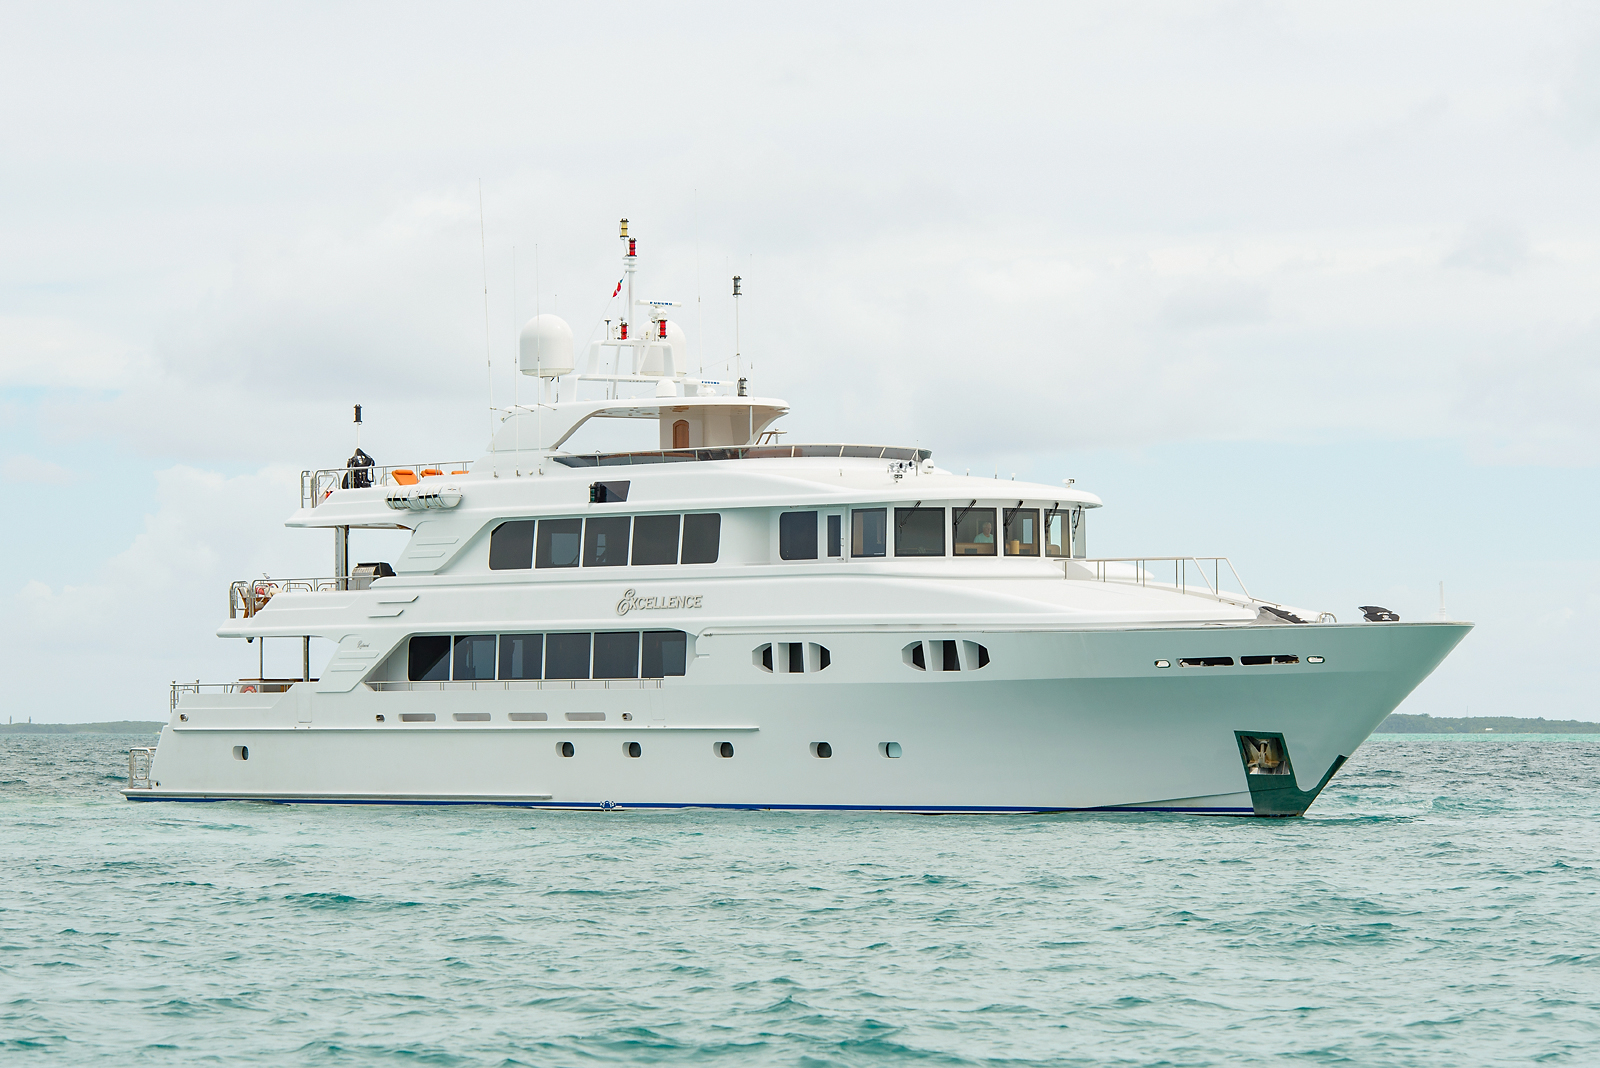 EXCELLENCE yacht Charter Brochure